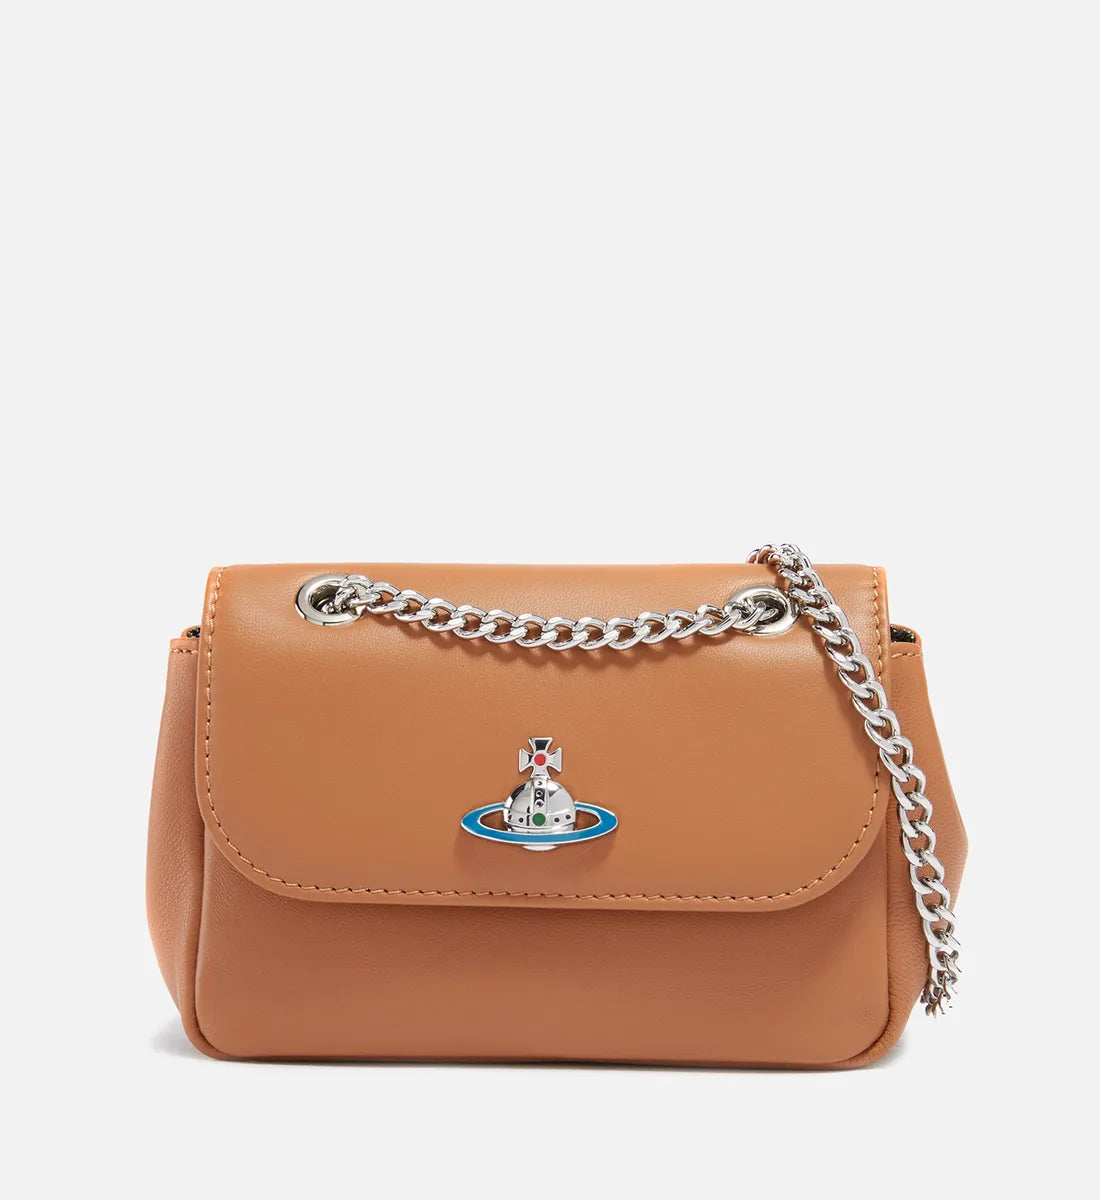 Vivienne Westwood Nappa Small Purse with Chain in Tan